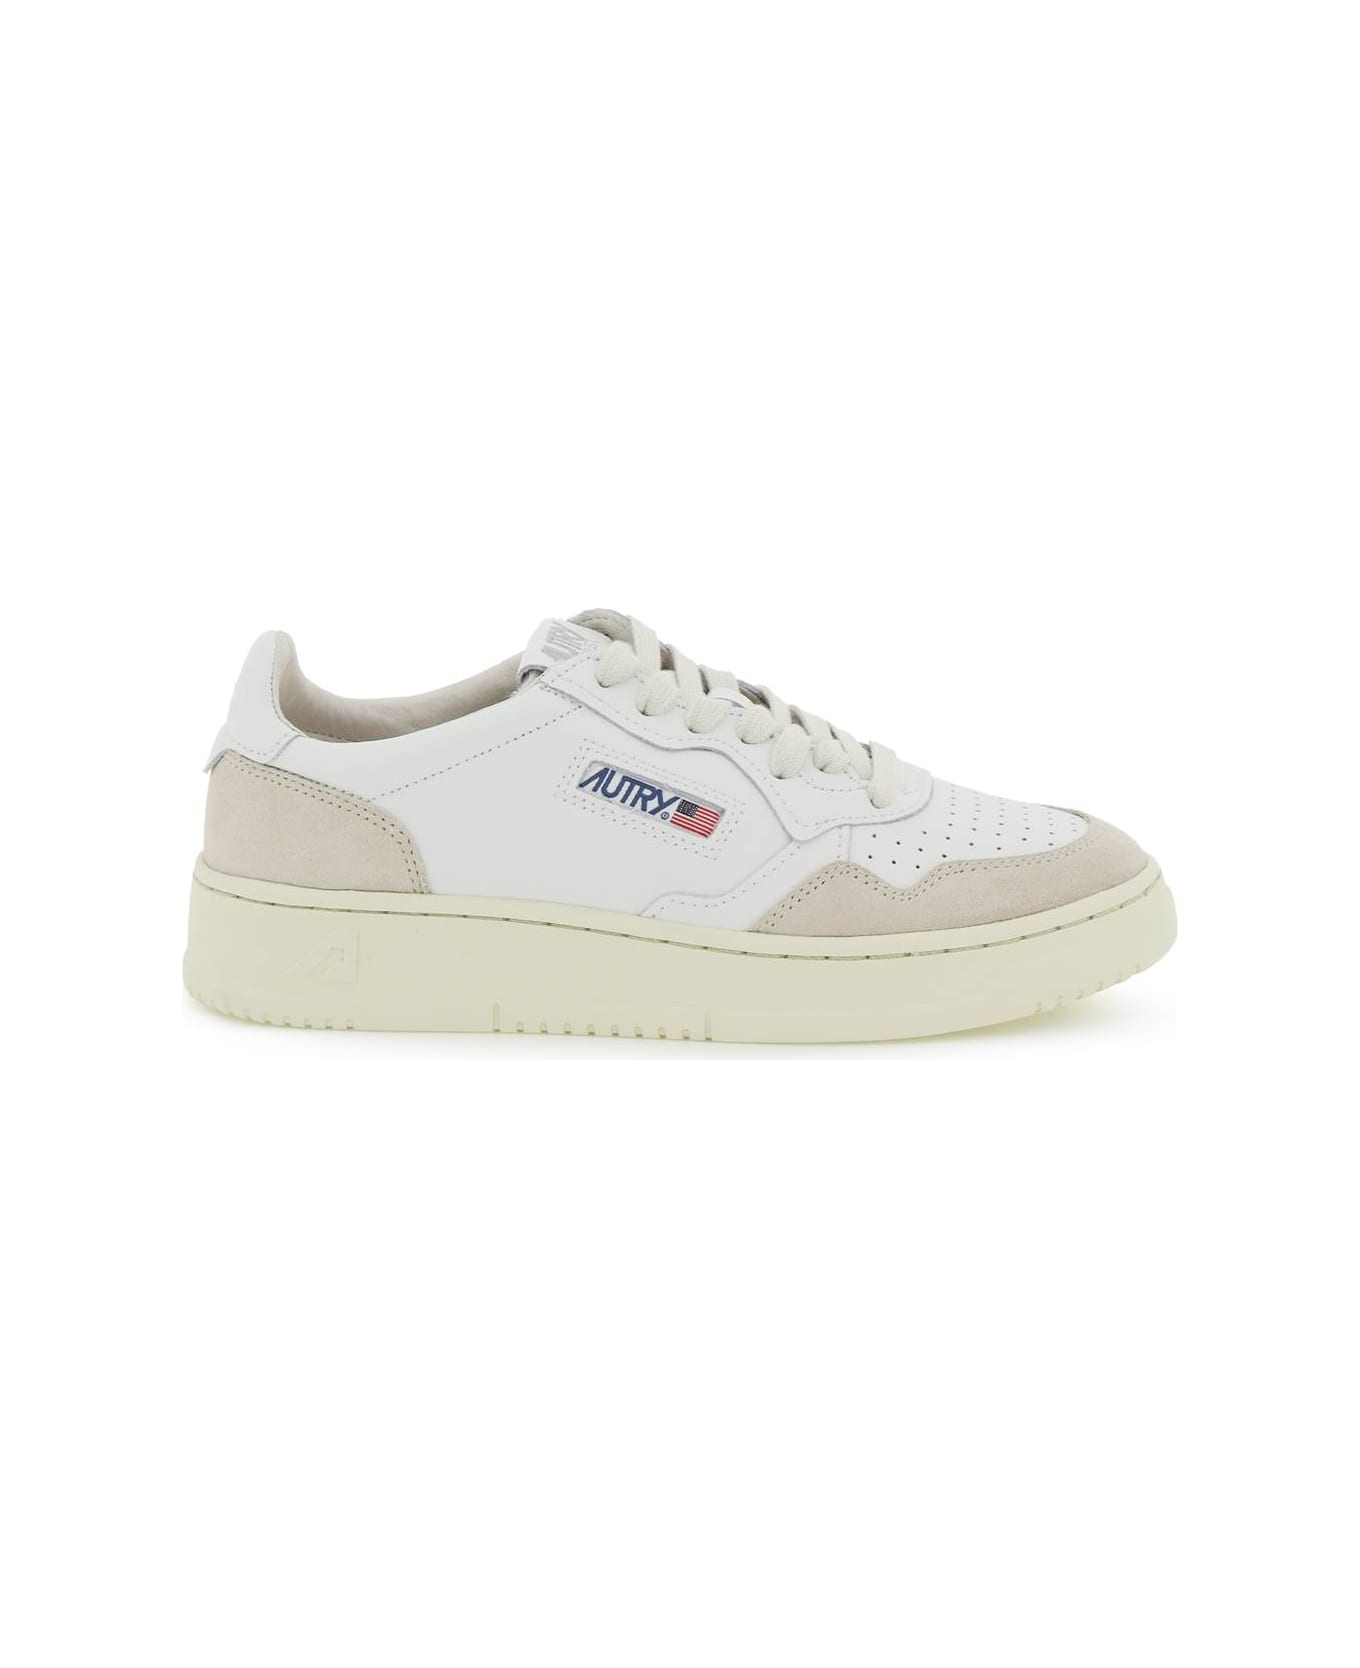 Autry Leather Medalist Low Sneakers - White スニーカー